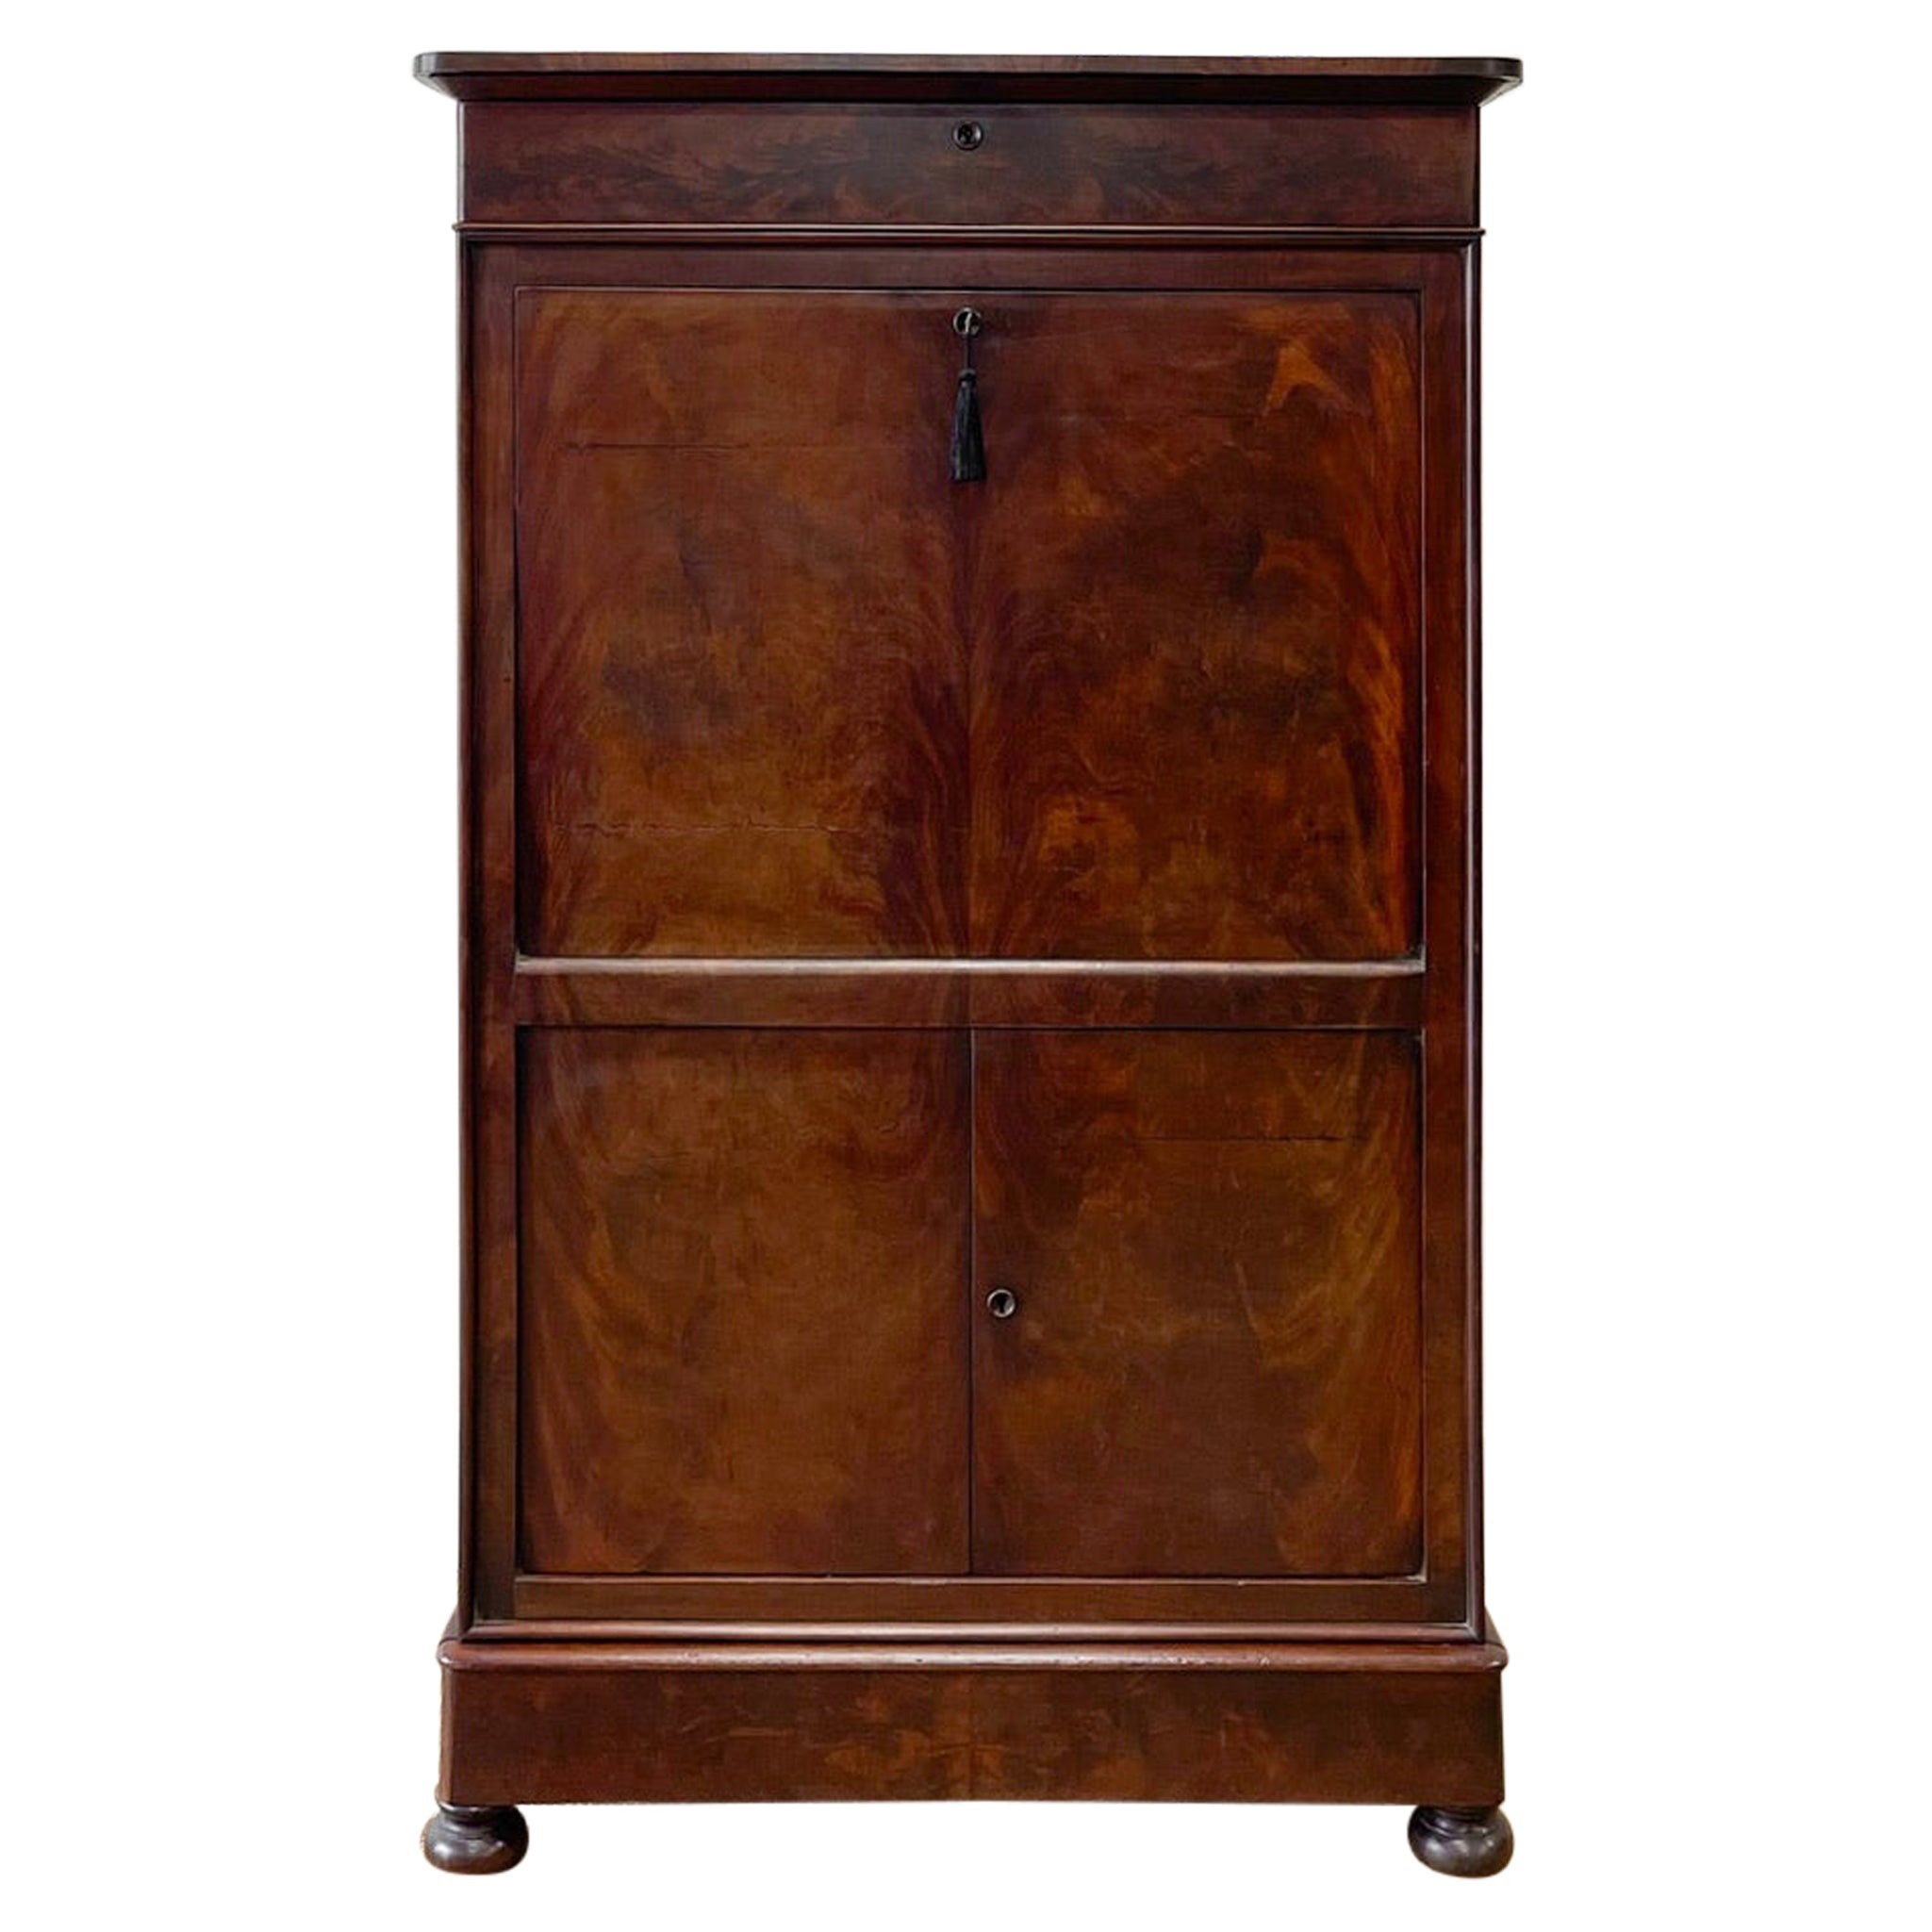 A Sophisticated Antique French Louis Phillipe Secretary For Sale